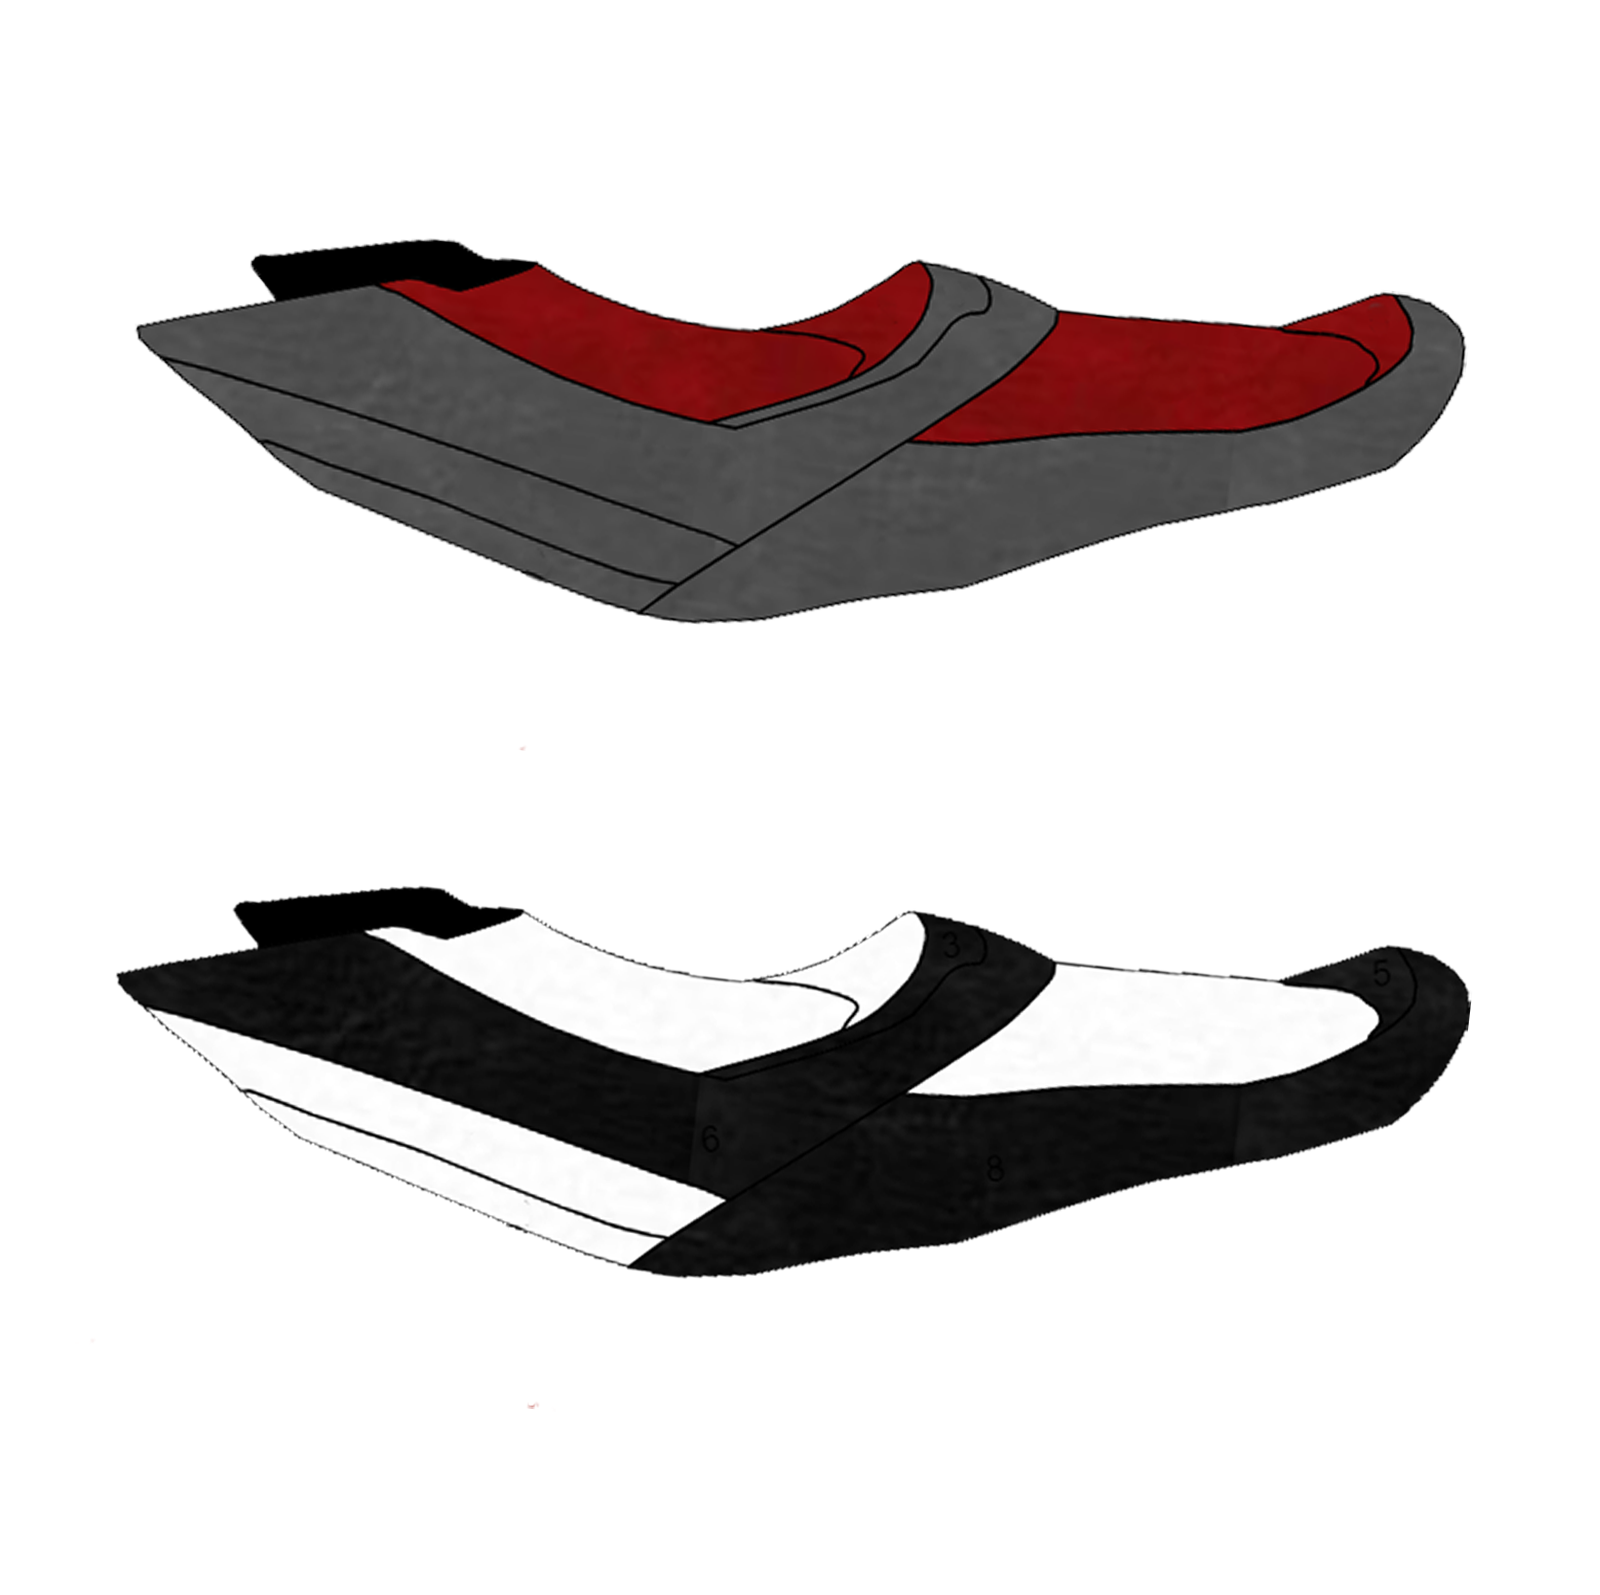 Details about   Sea-Doo Seat Cover 2010-2015 GTX 155-2011-2013 GTX 215-2010-2011 GTX iS 215-2009 